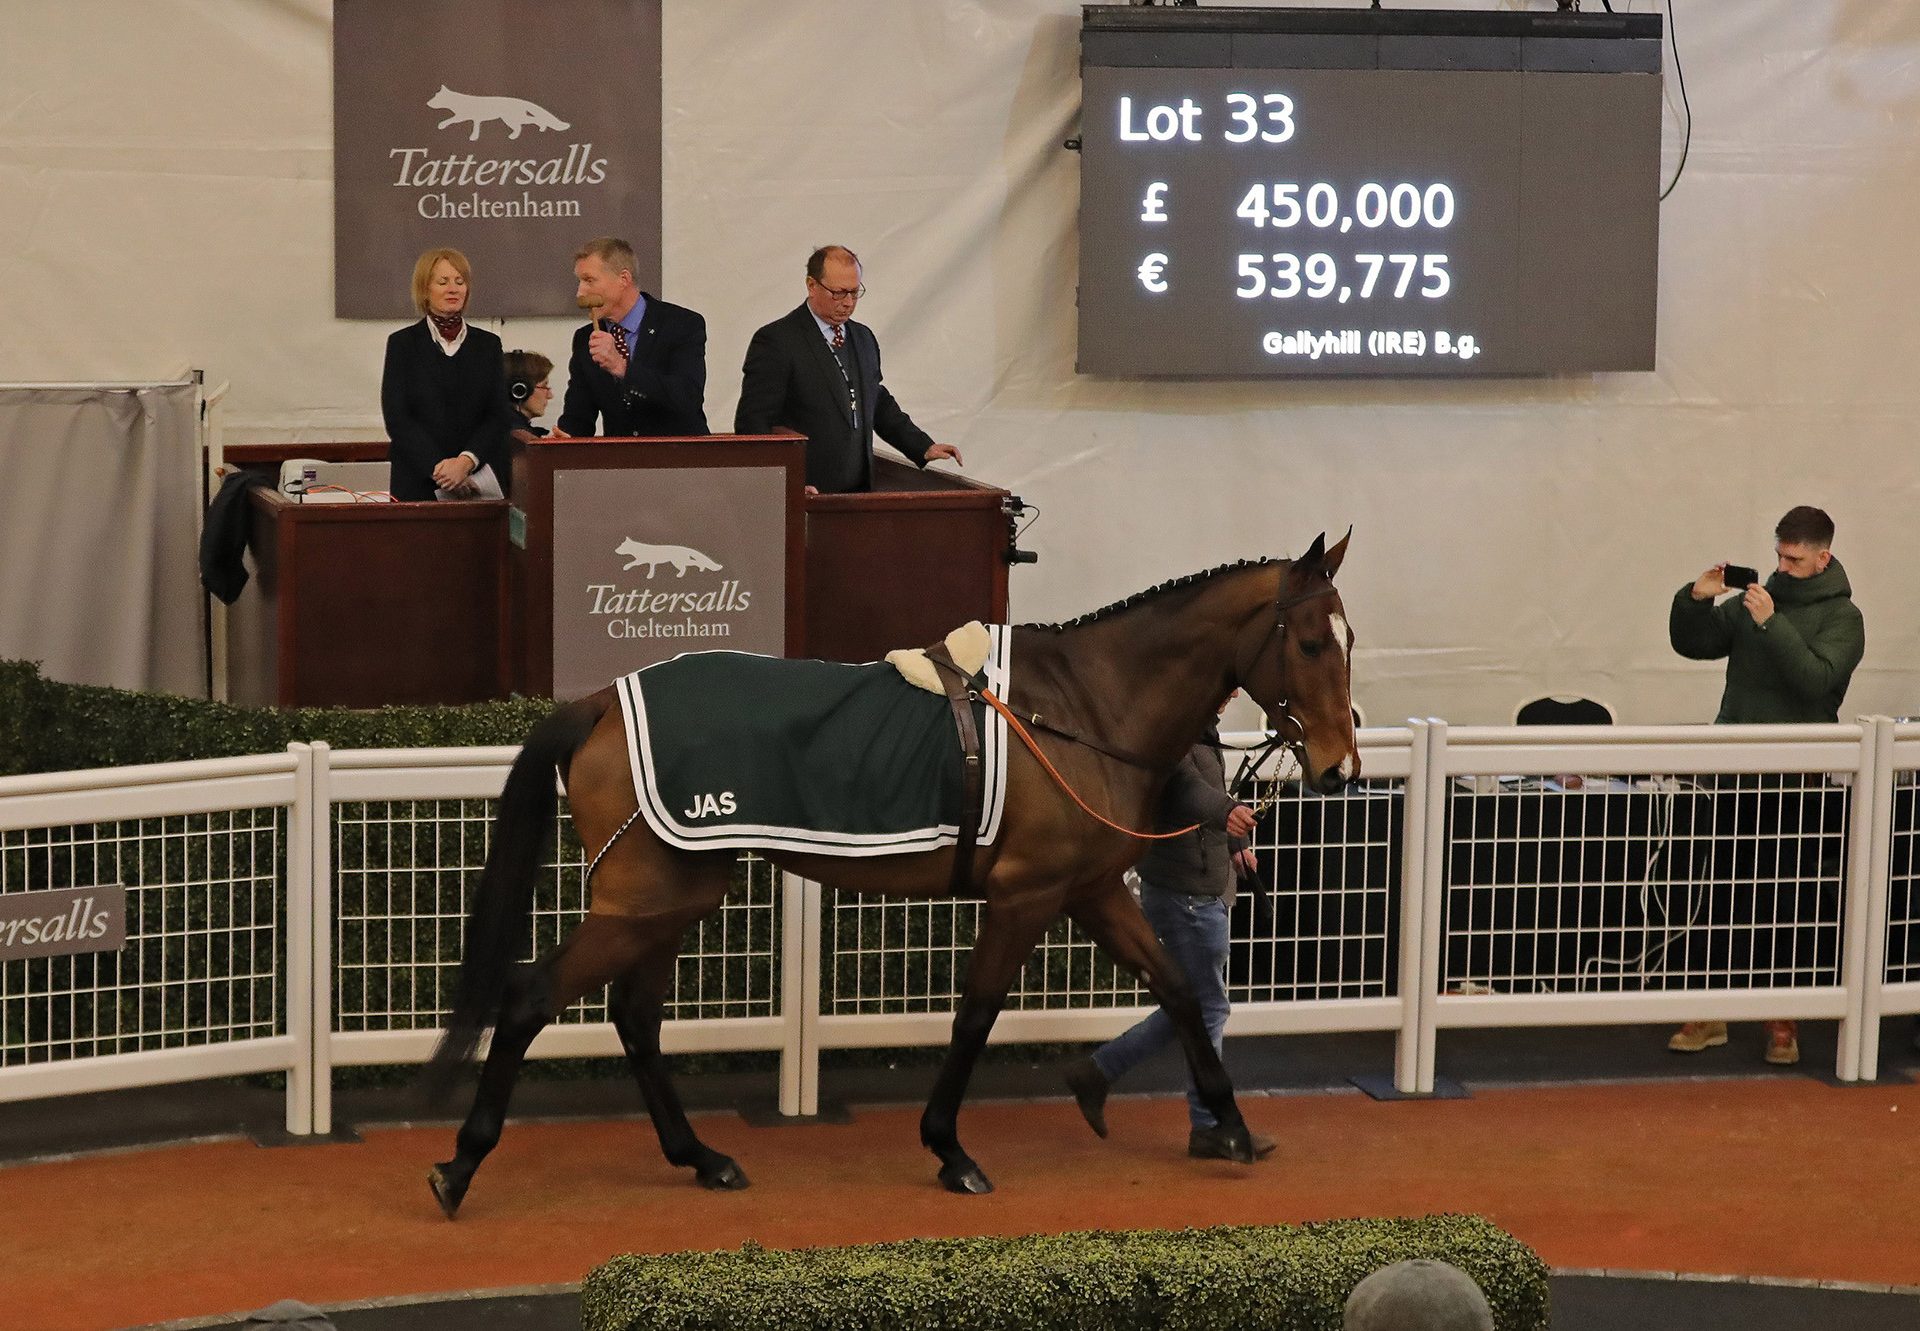 Gallyhill (Getaway) selling for £450,000 at Cheltenham